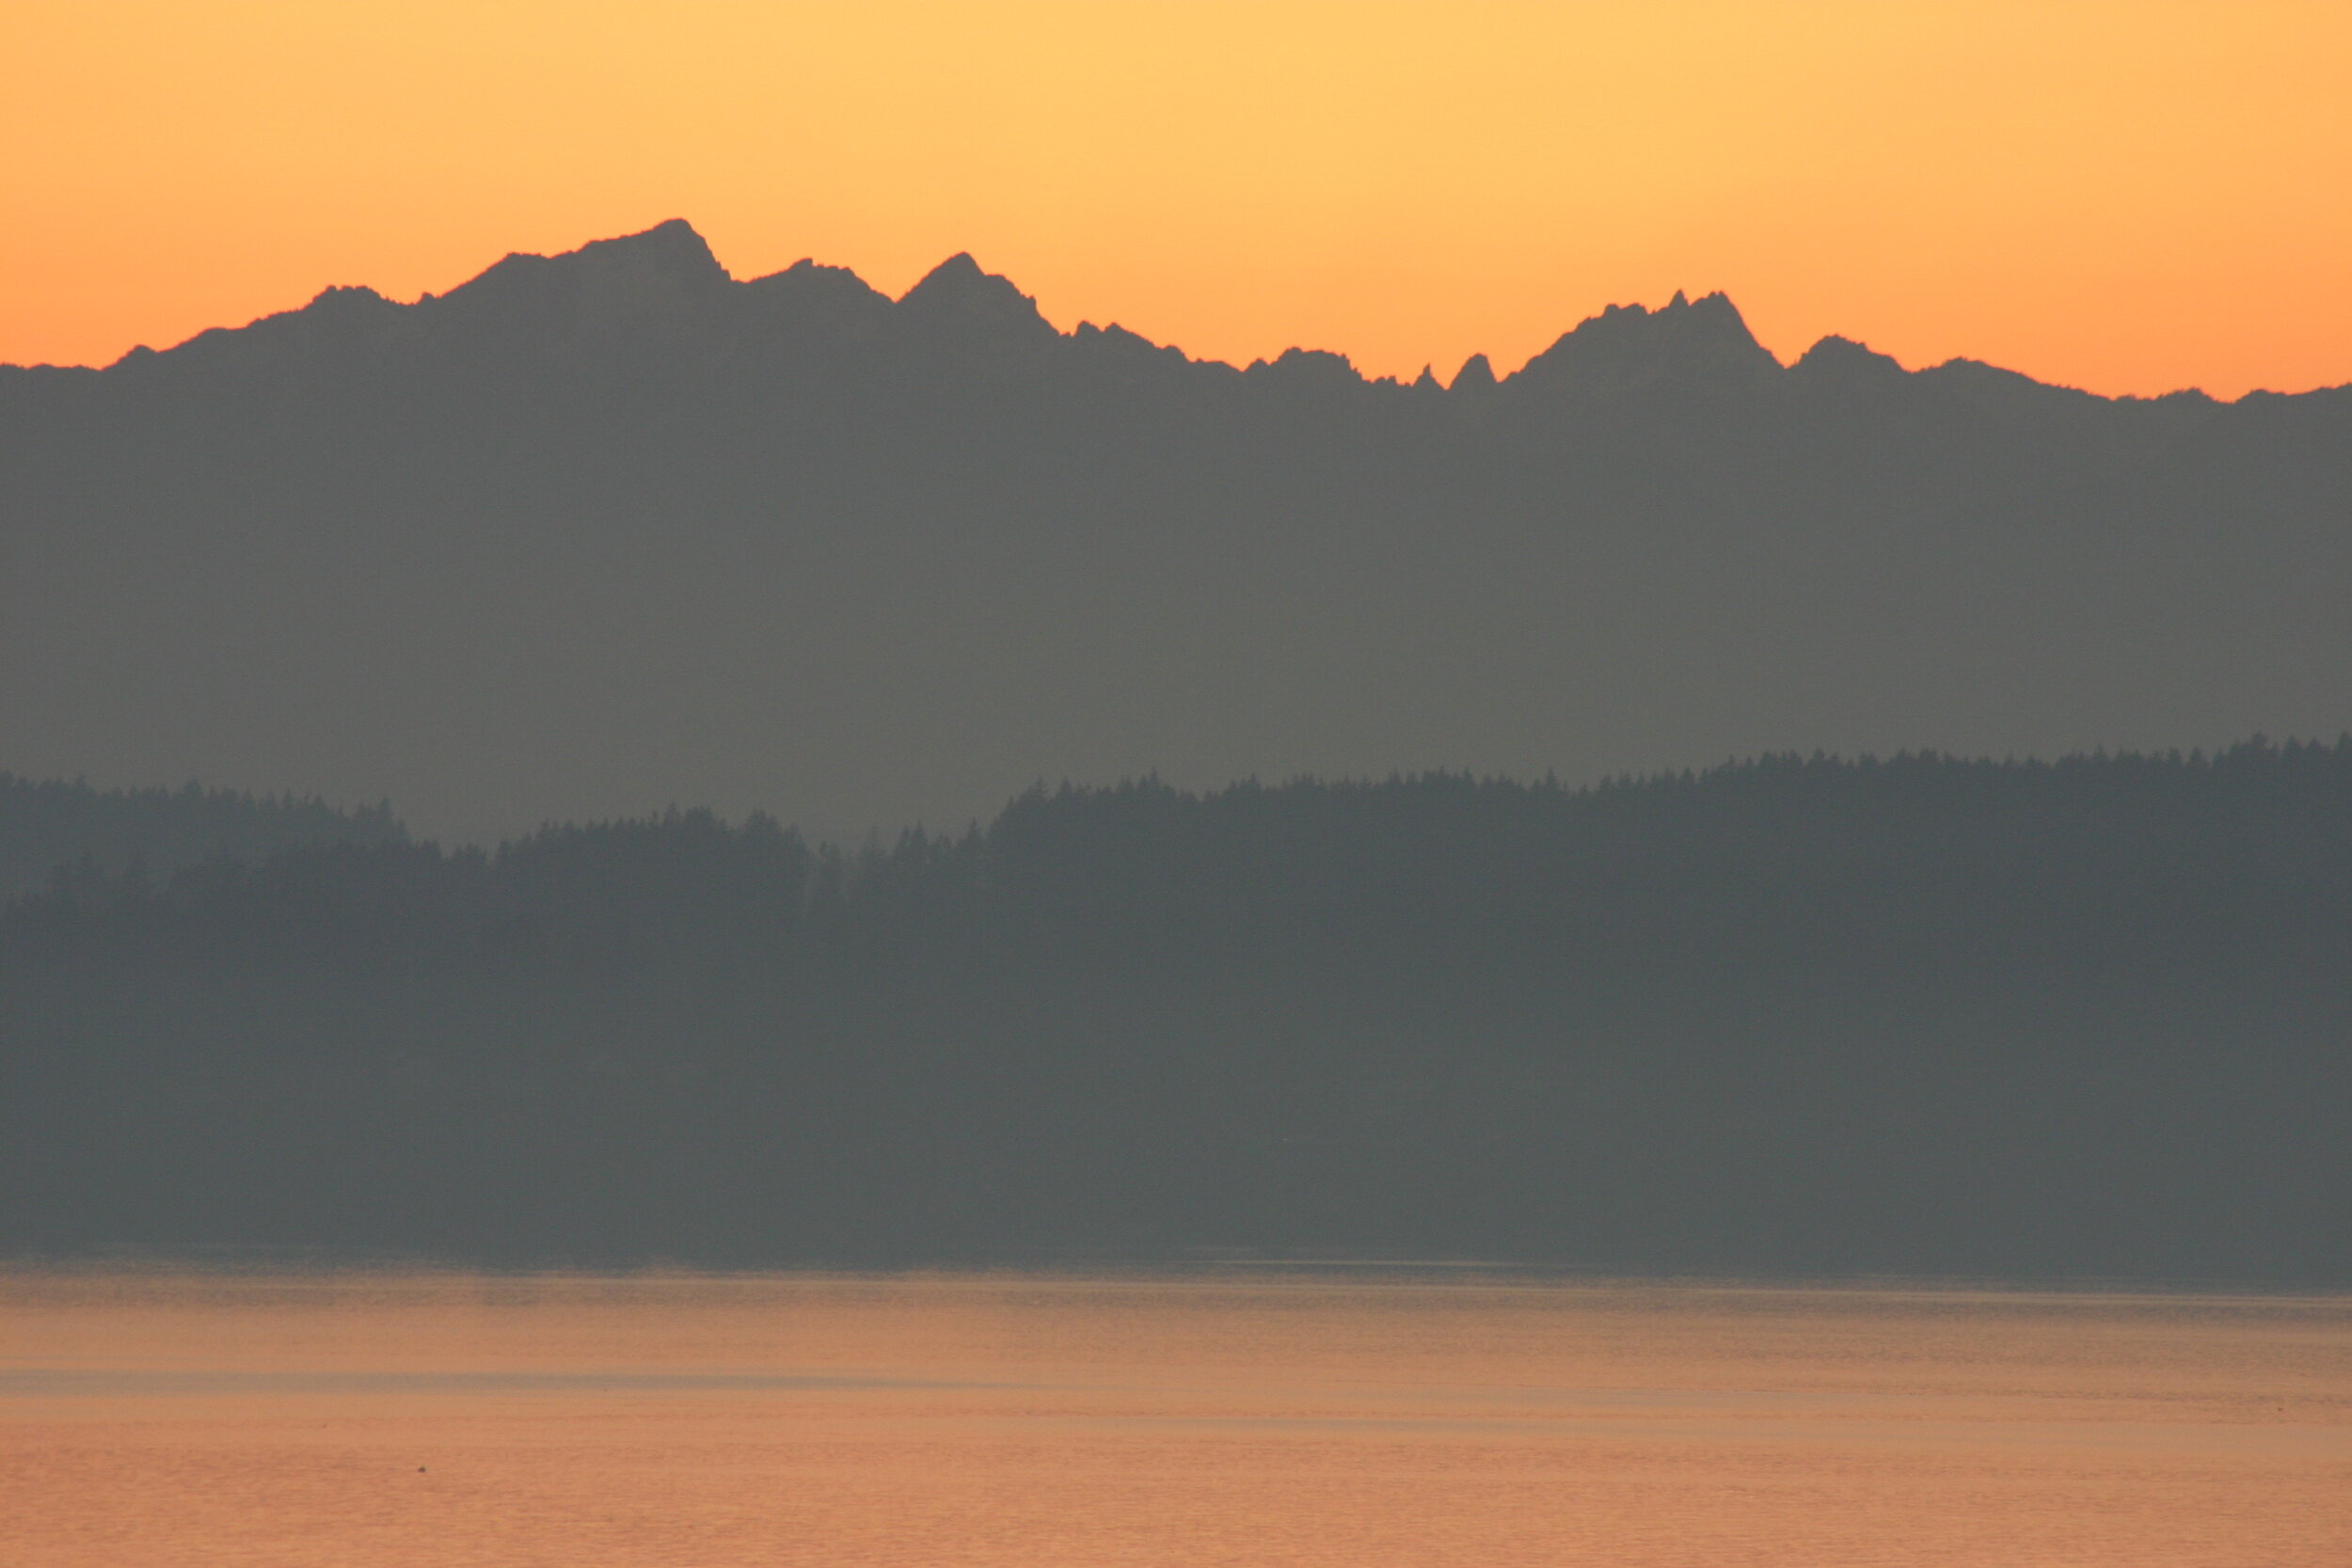 049 - Sunset in Shades - Discovery Park, Seattle.JPG